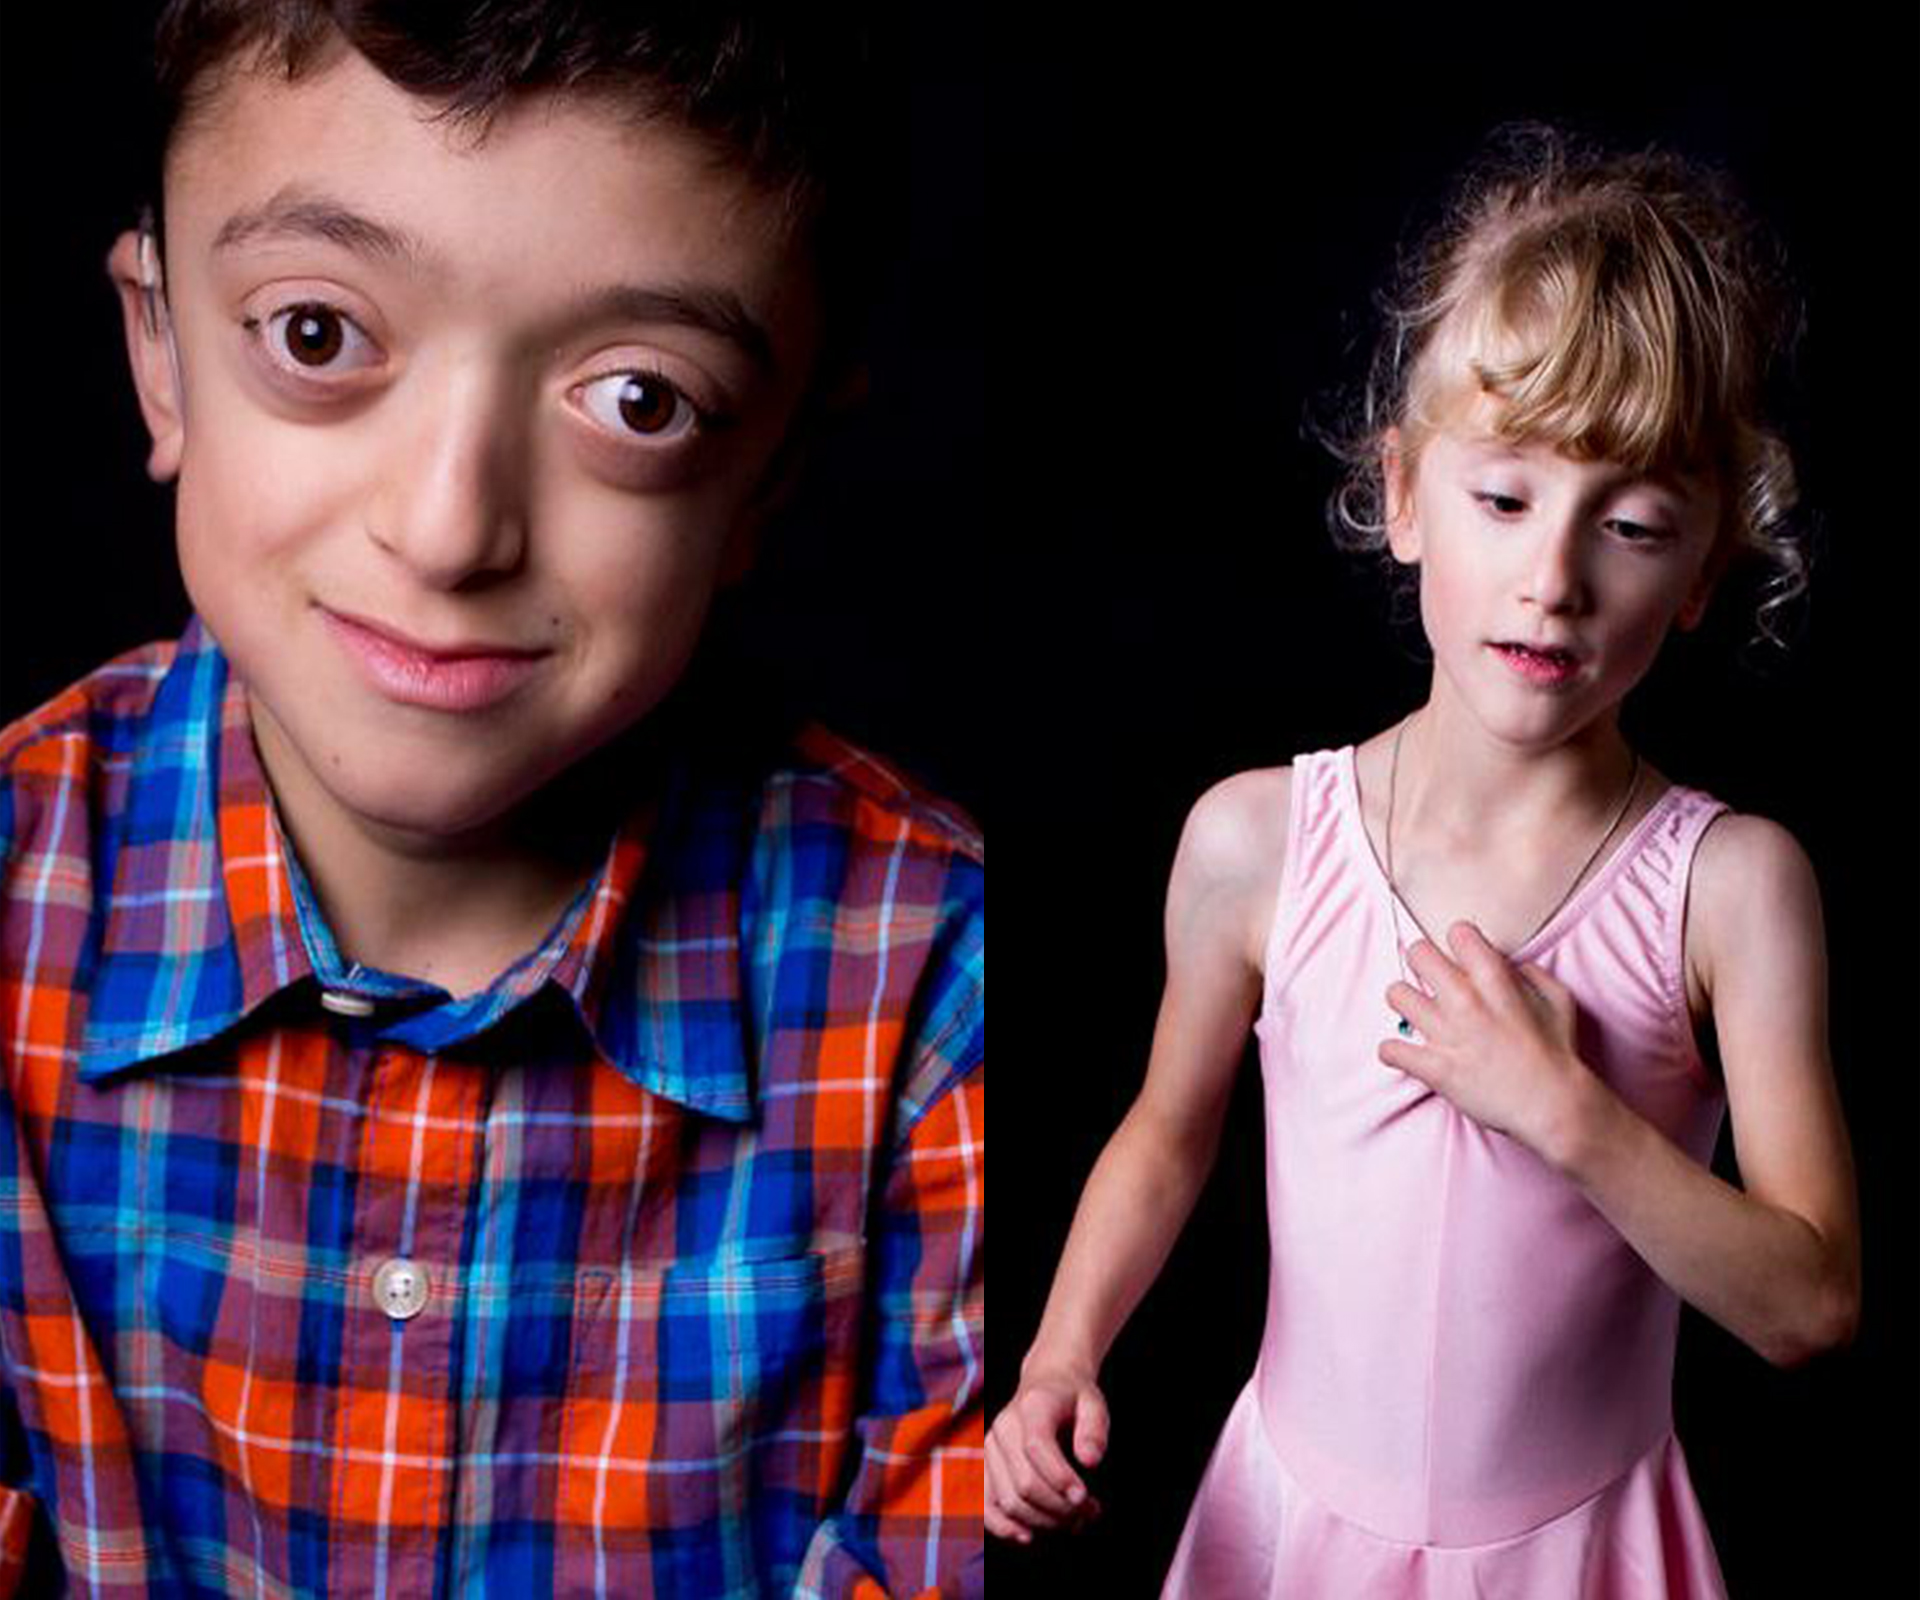 The Rare Project: woman photographs children with rare disabilities